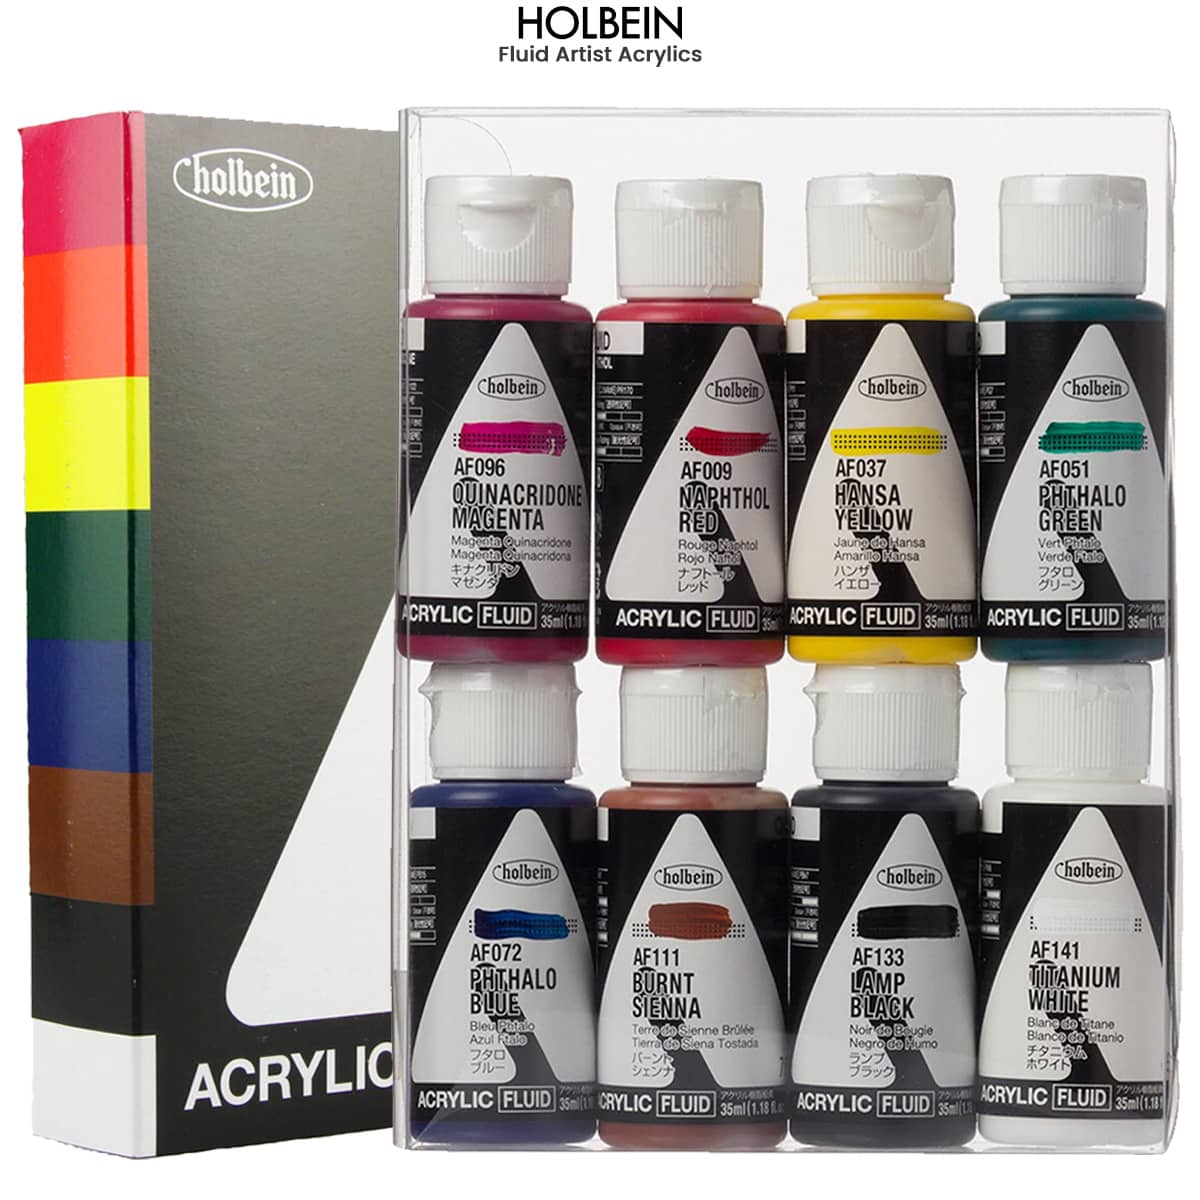  Daler Rowney System3 Purple 500ml Acrylic Paint Tube - Acrylic  Painting Supplies for Artists and Students - Artist Paint for Murals Canvas  and More - Art Paint for Any Skill Set 